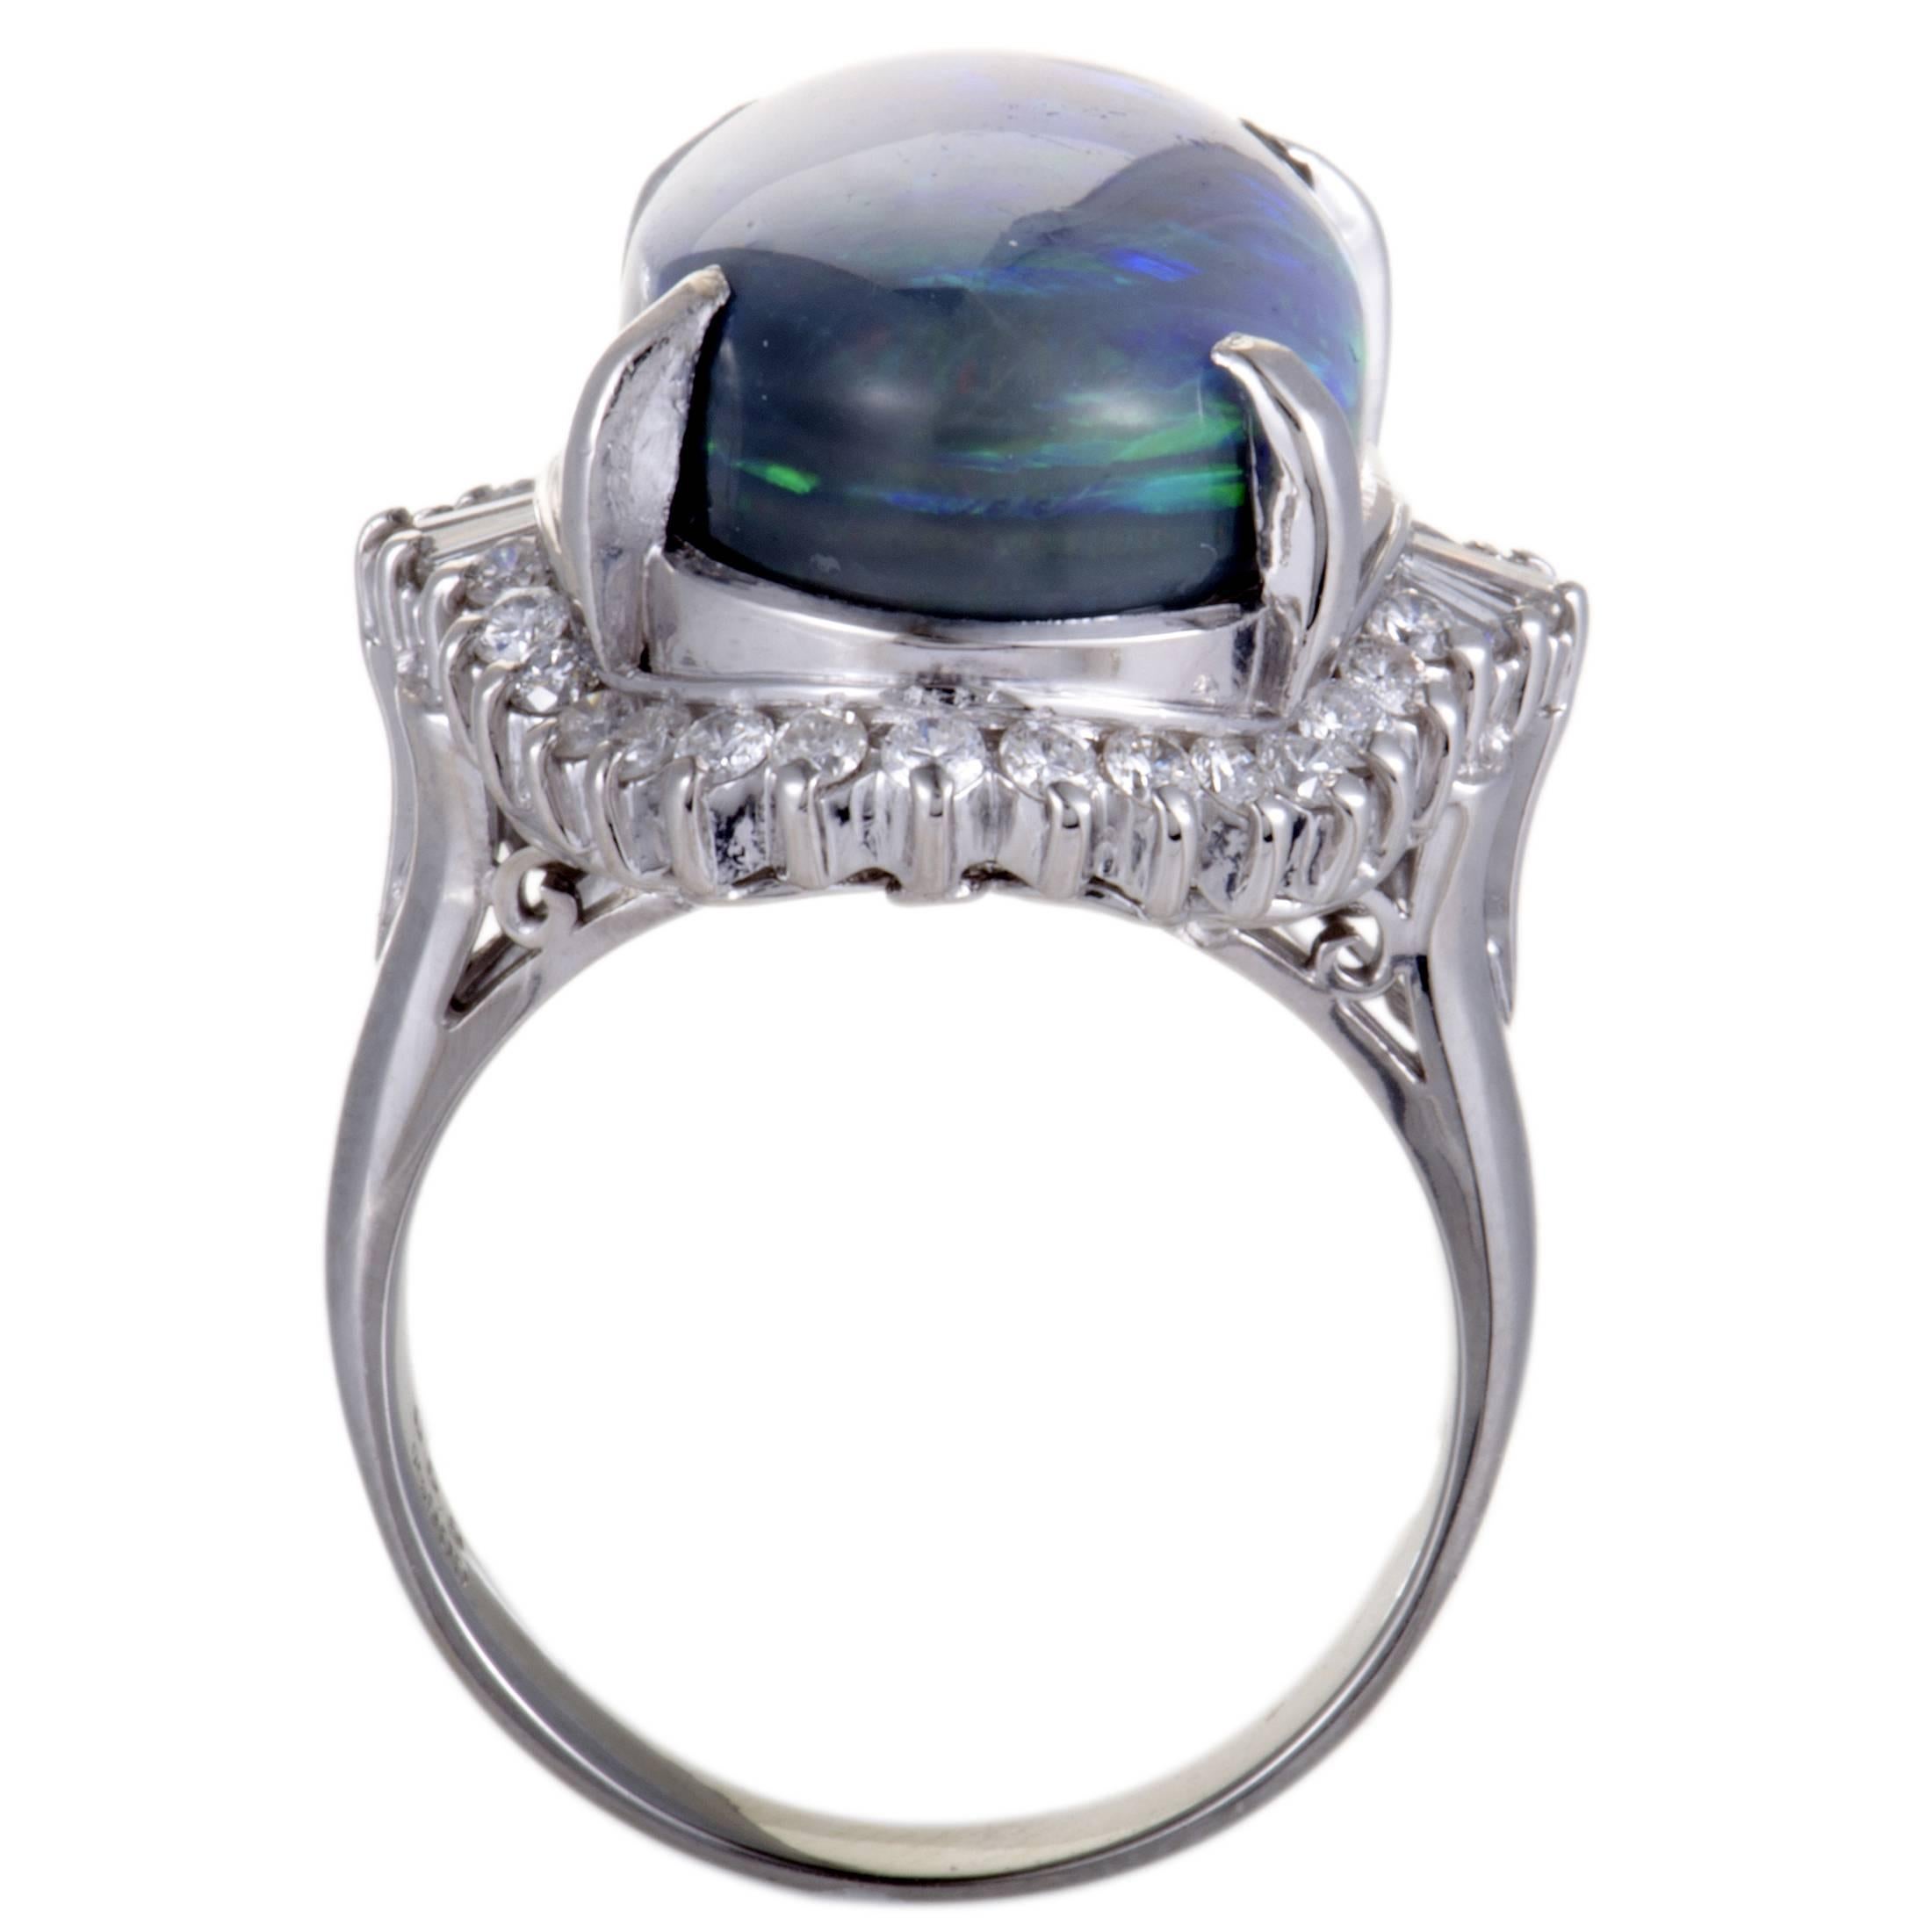 The prestigious gleam of platinum and the alluring glisten of dazzling diamonds, weighing 0.69ct, produce an incredibly luxurious effect in this gorgeous ring. The glamorous ring also features a sensational blue opal of 11.58ct that immensely